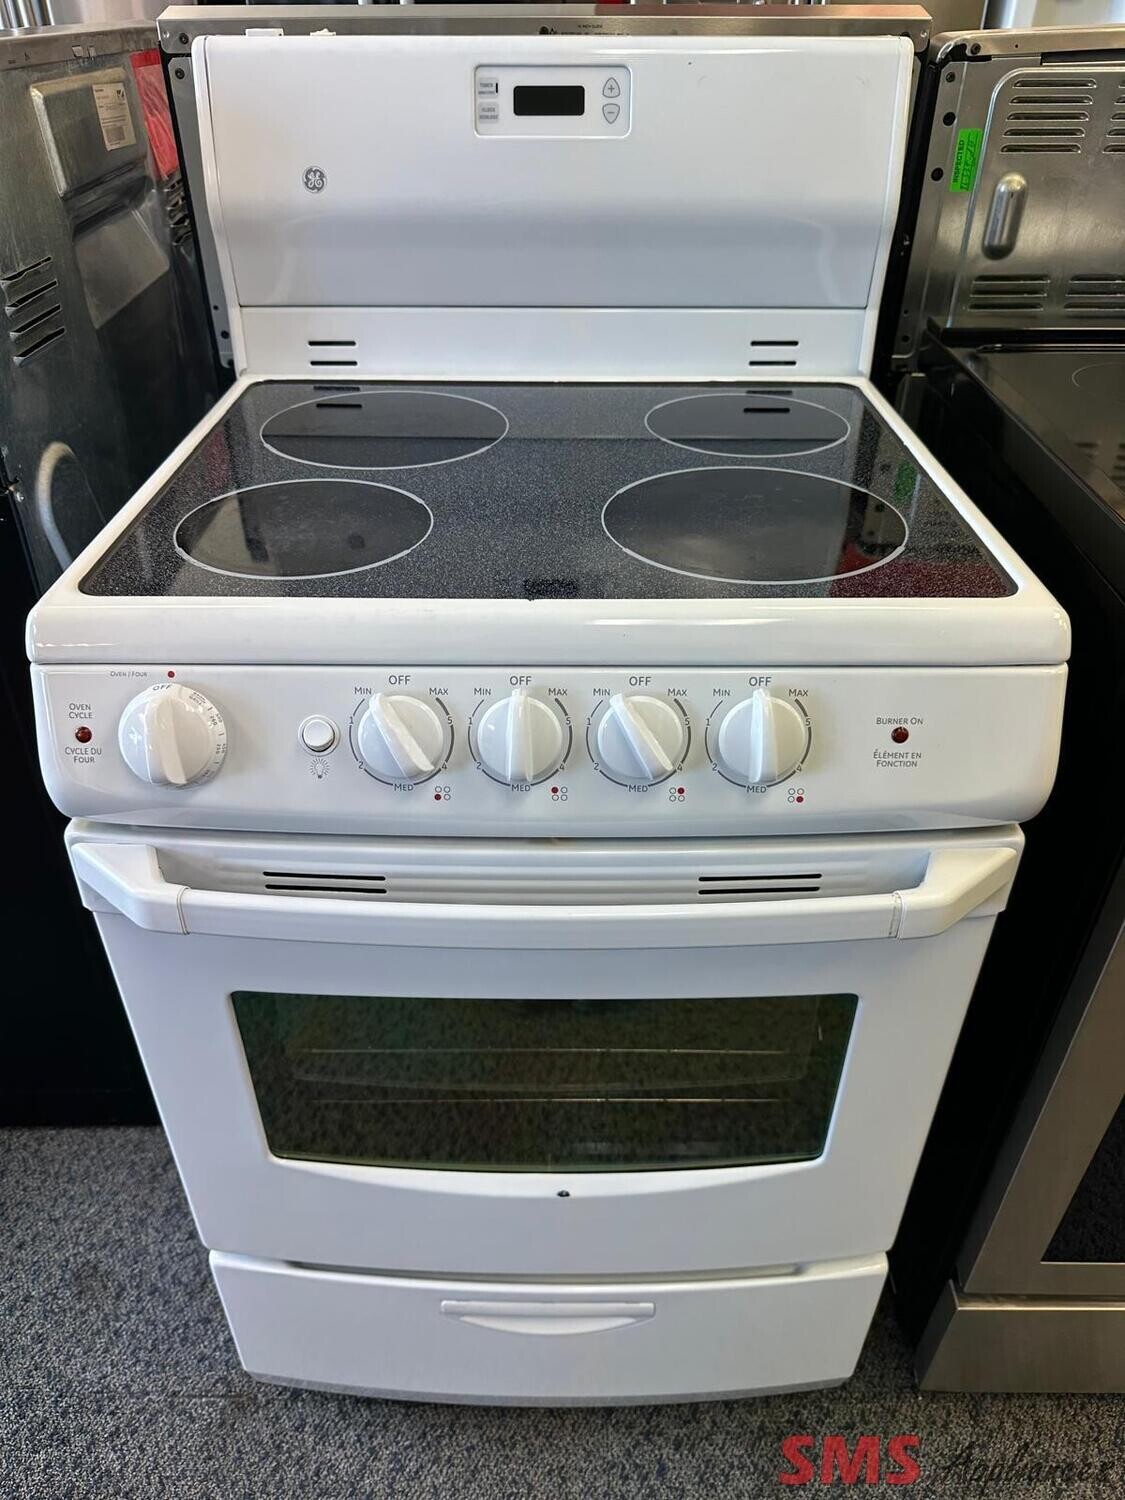 GE 24" Glass Top Stove JCAS745MSS